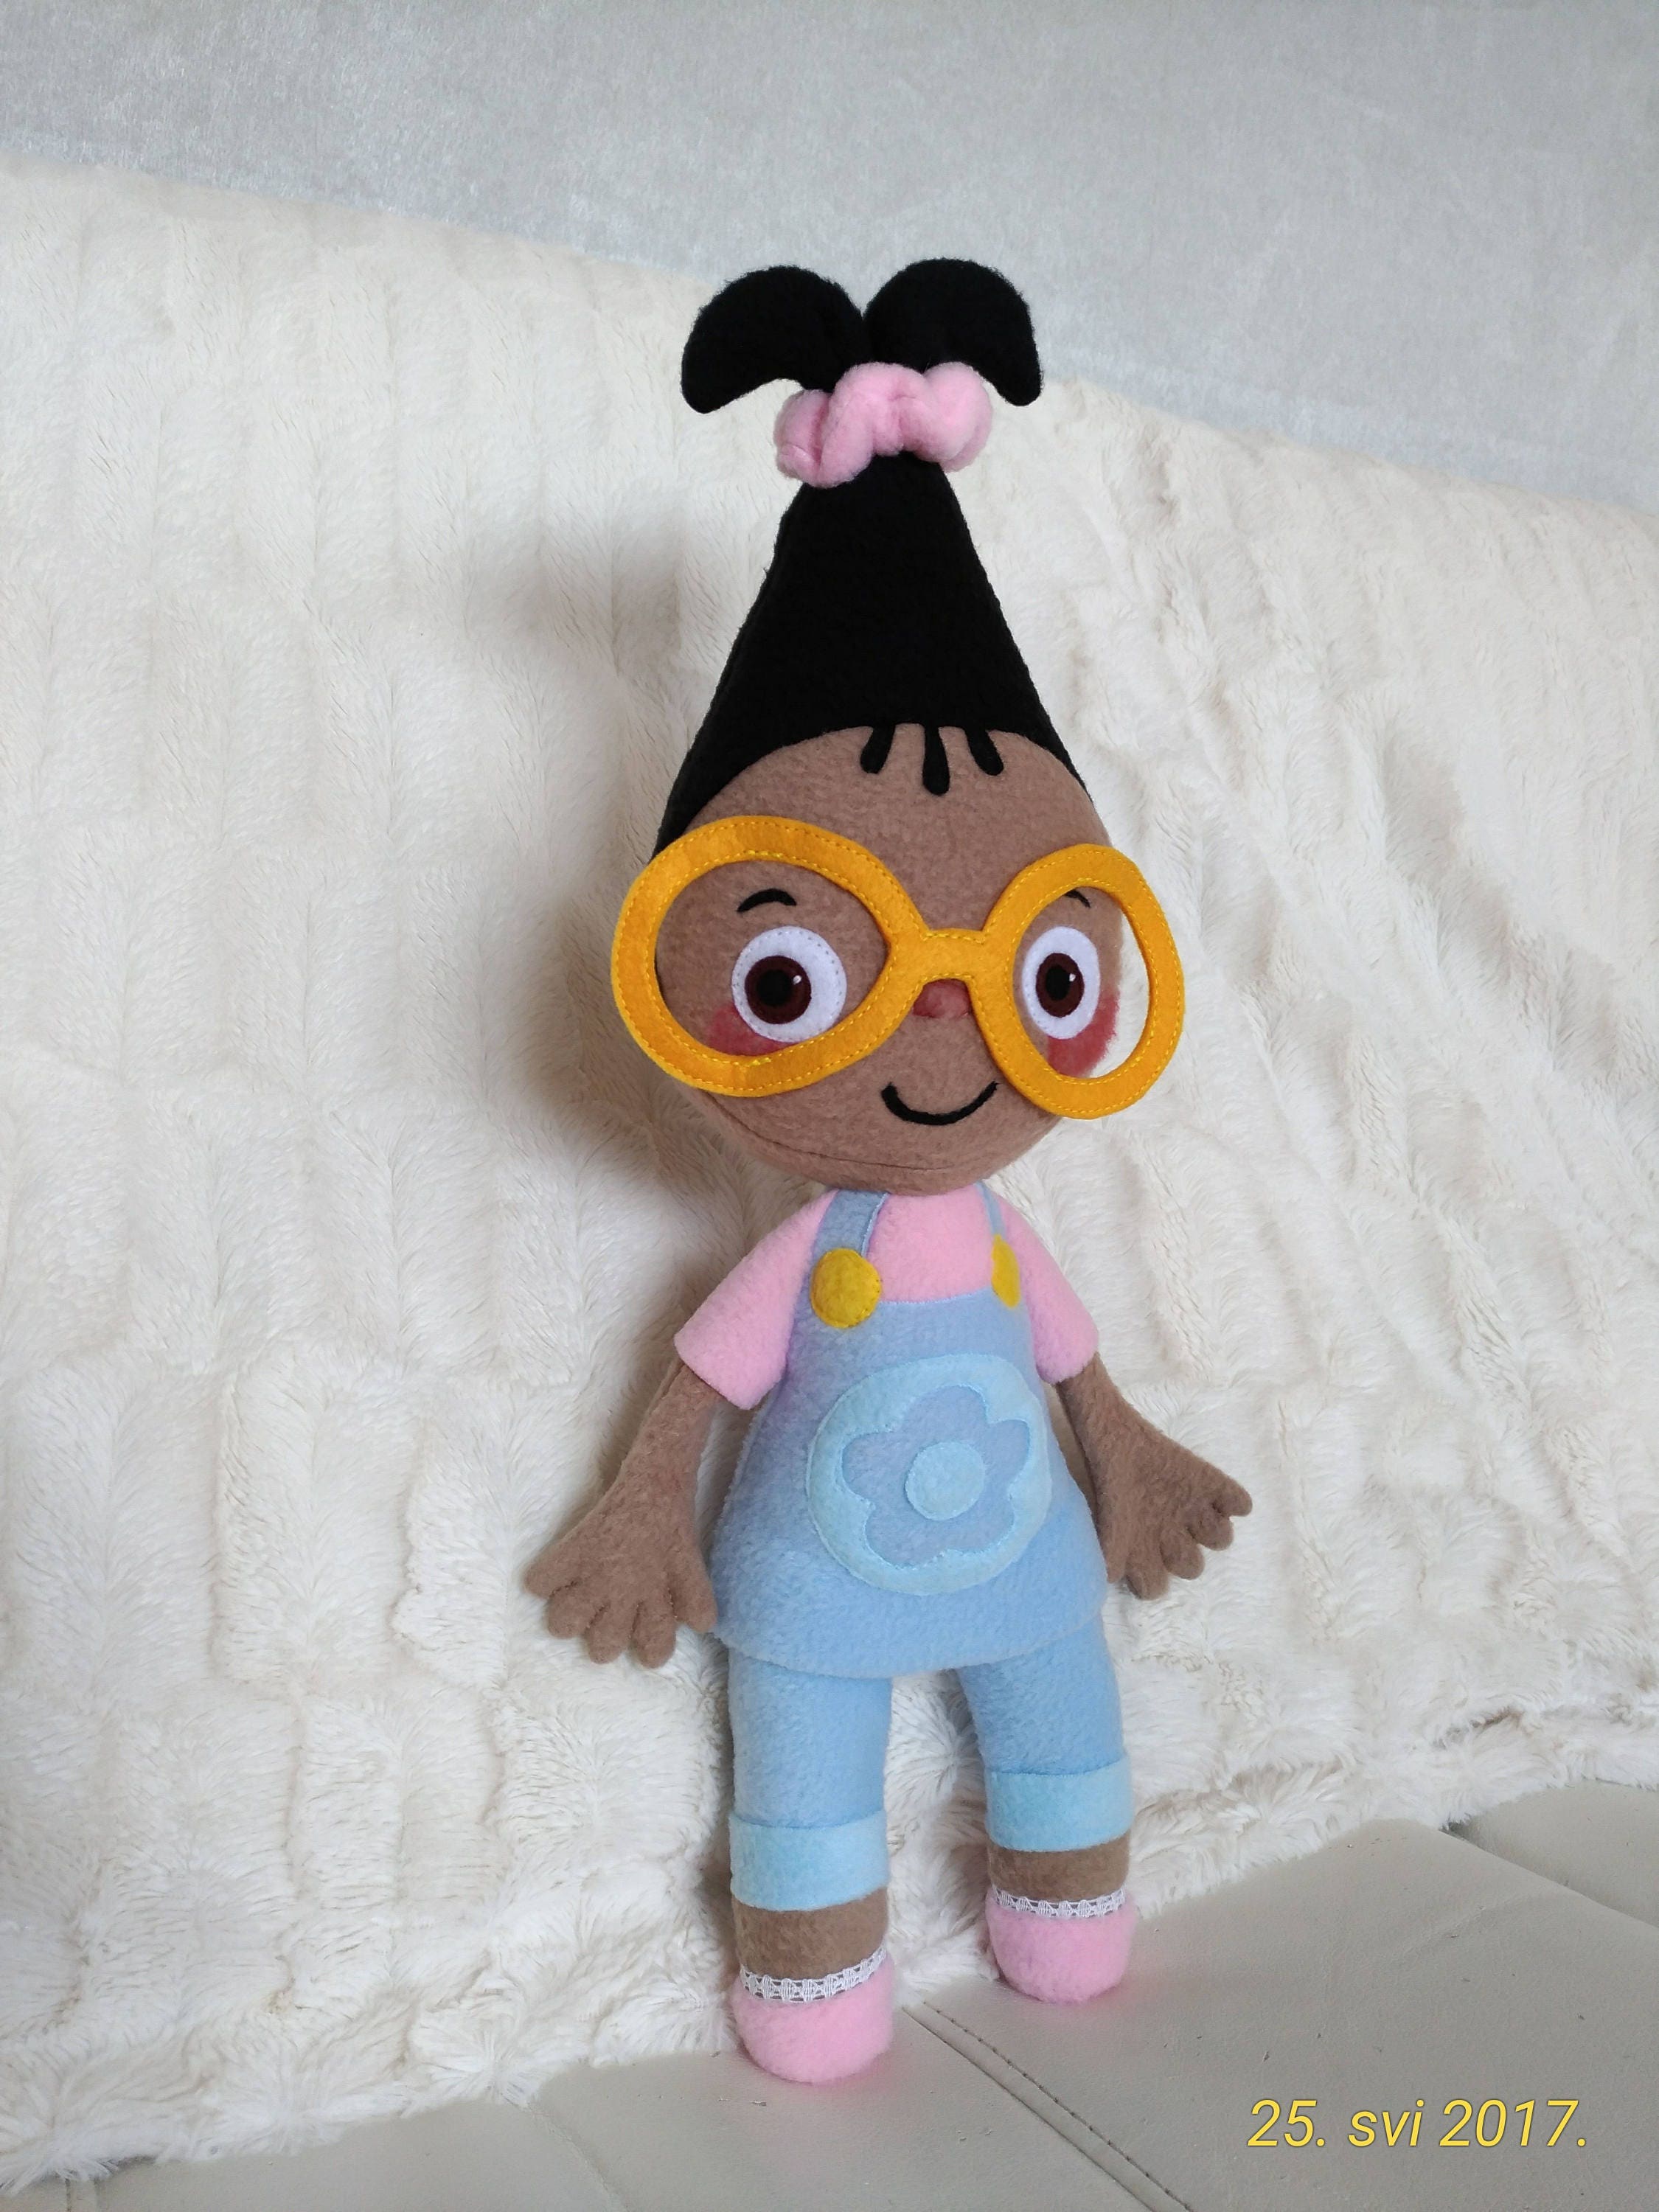 Buy Plush Toys Just Like Mona and Sketch Online in India  Etsy